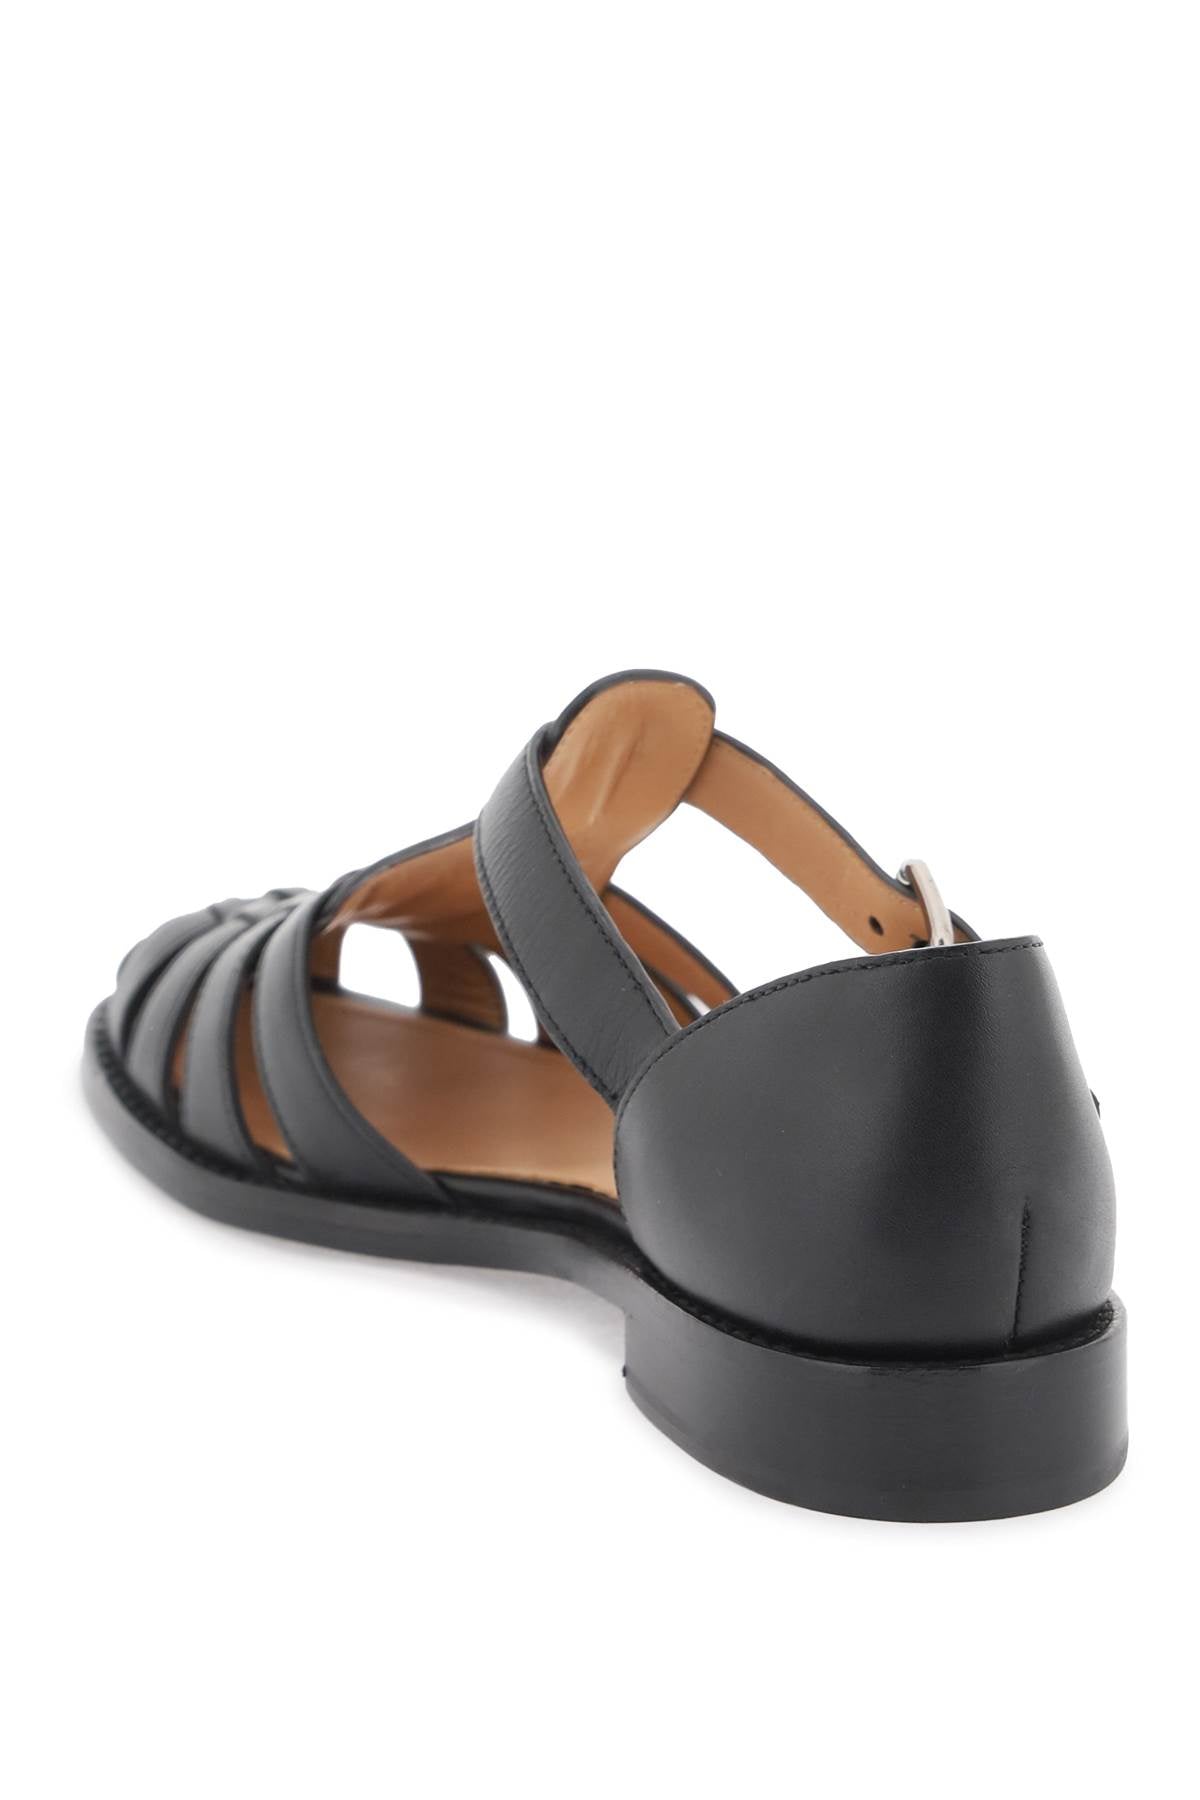 Church's kelsey cage sandals-2